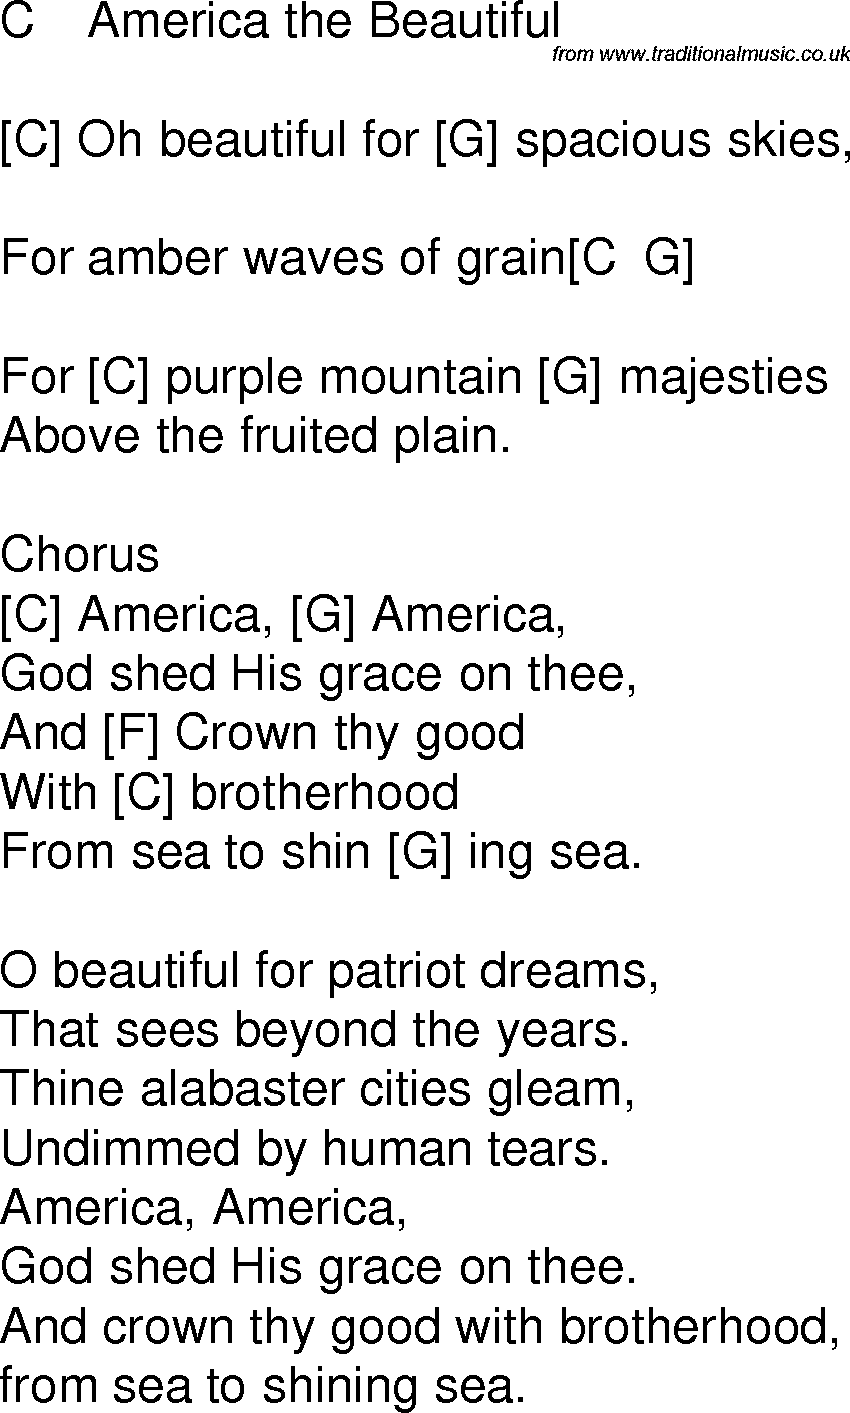 Old time song lyrics with chords for America The Beautiful C